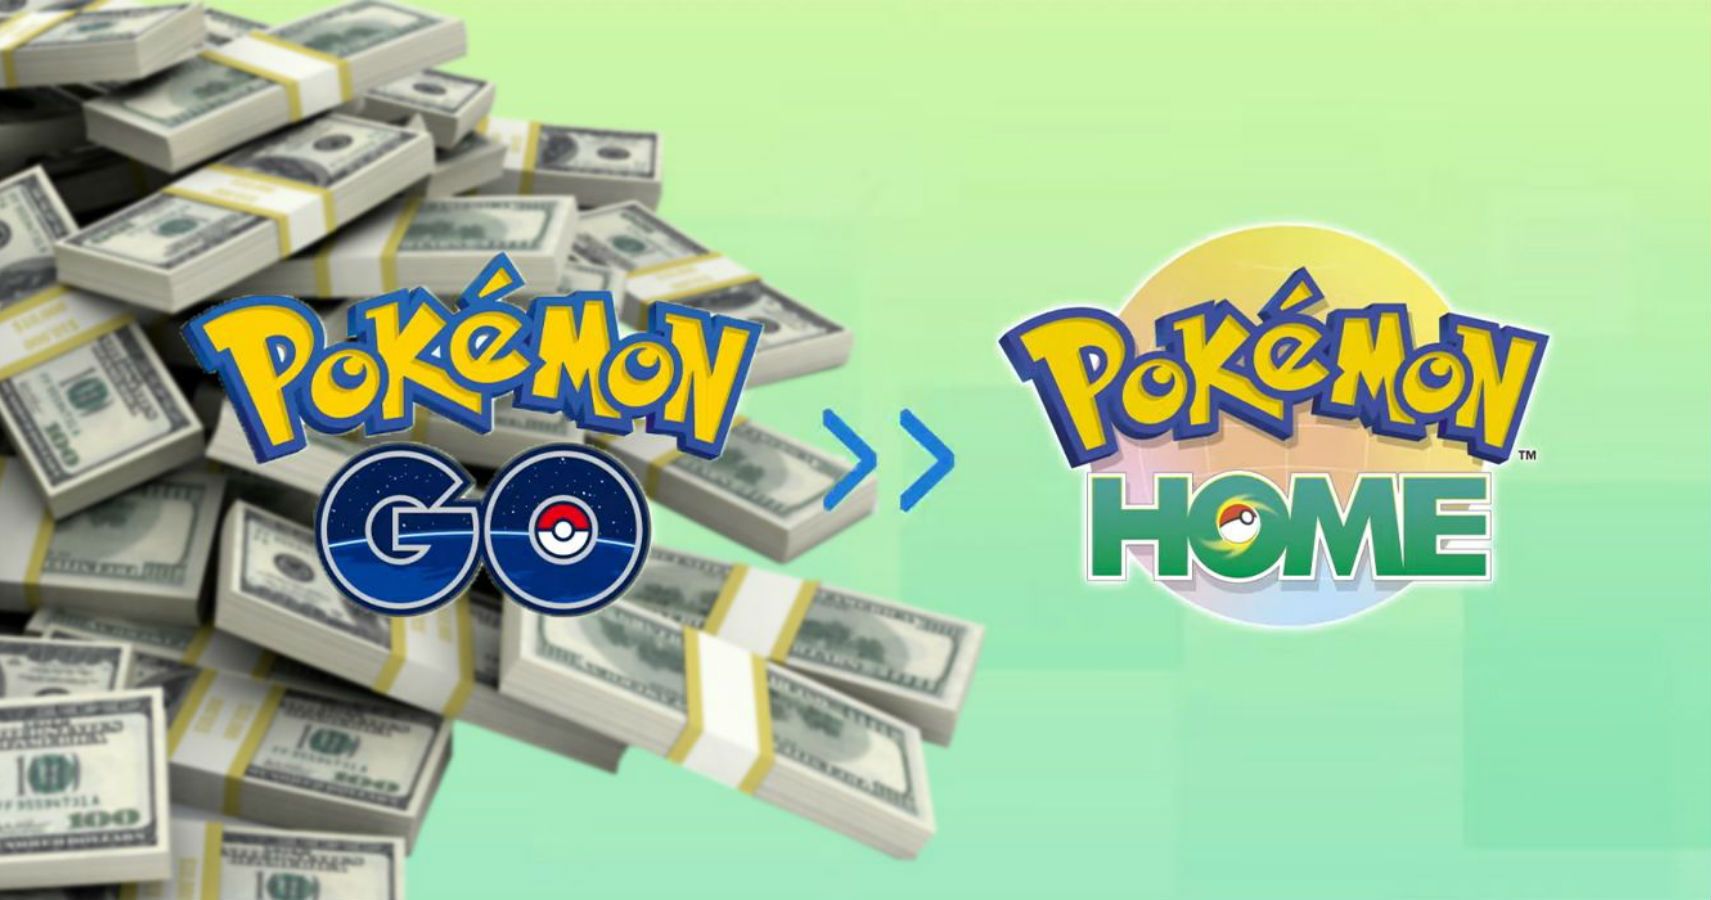 Shiny And Legendary Transfers Between Pokemon Go And Home May Cost More Energy